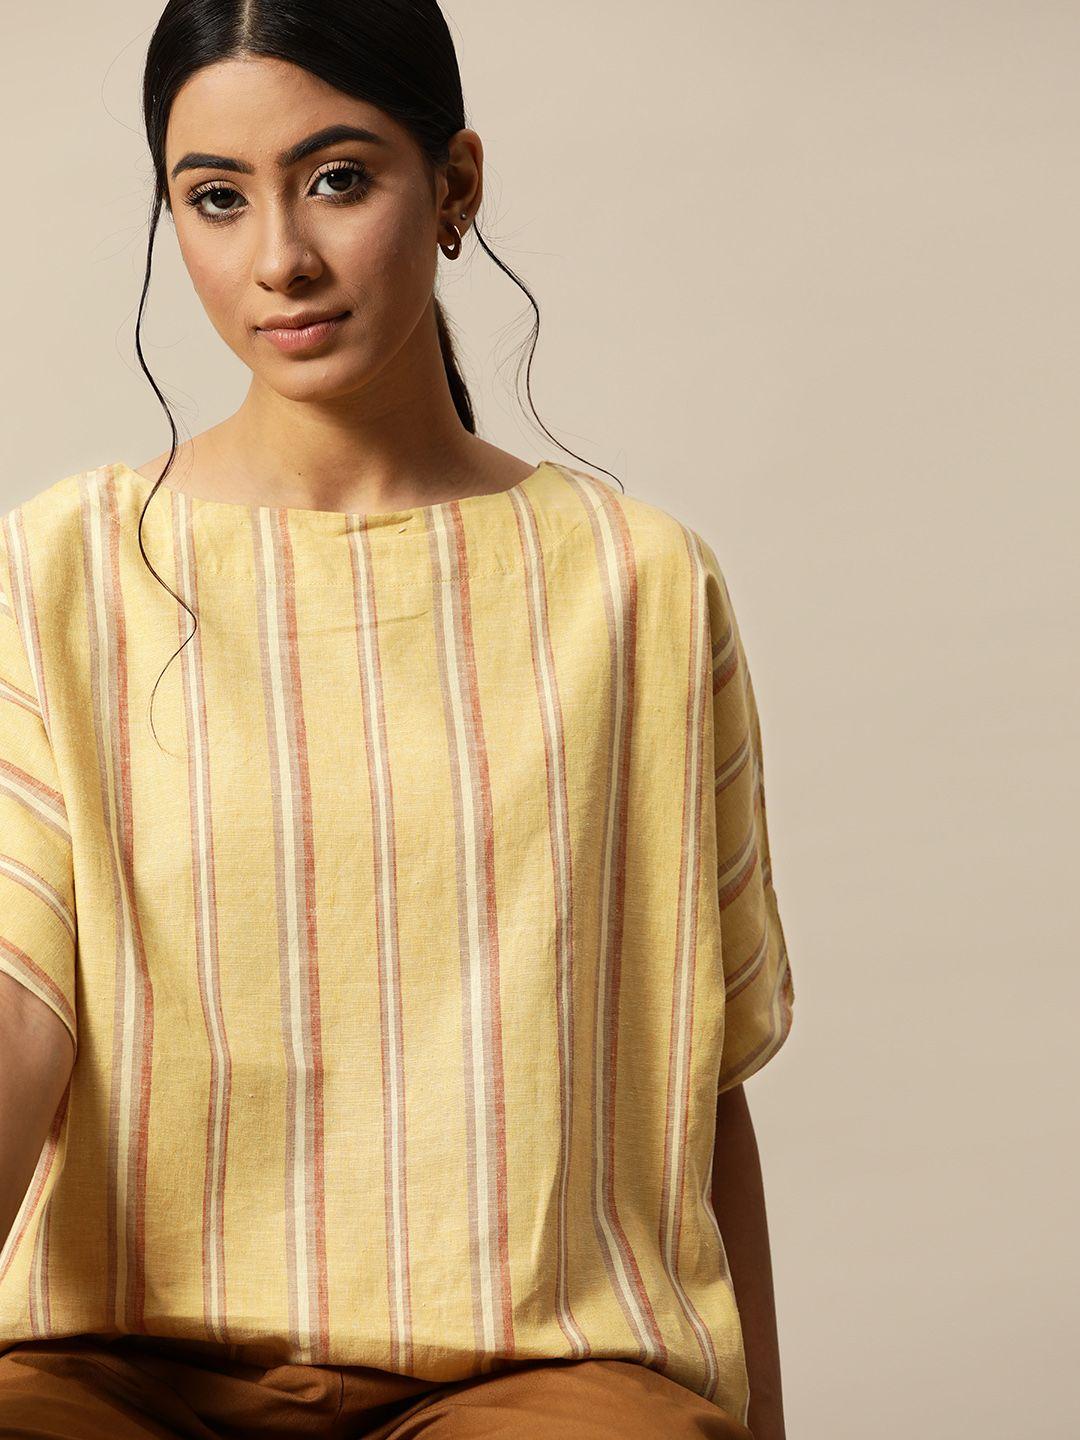 bower mustard yellow and rust orange extended sleeves linen cotton top